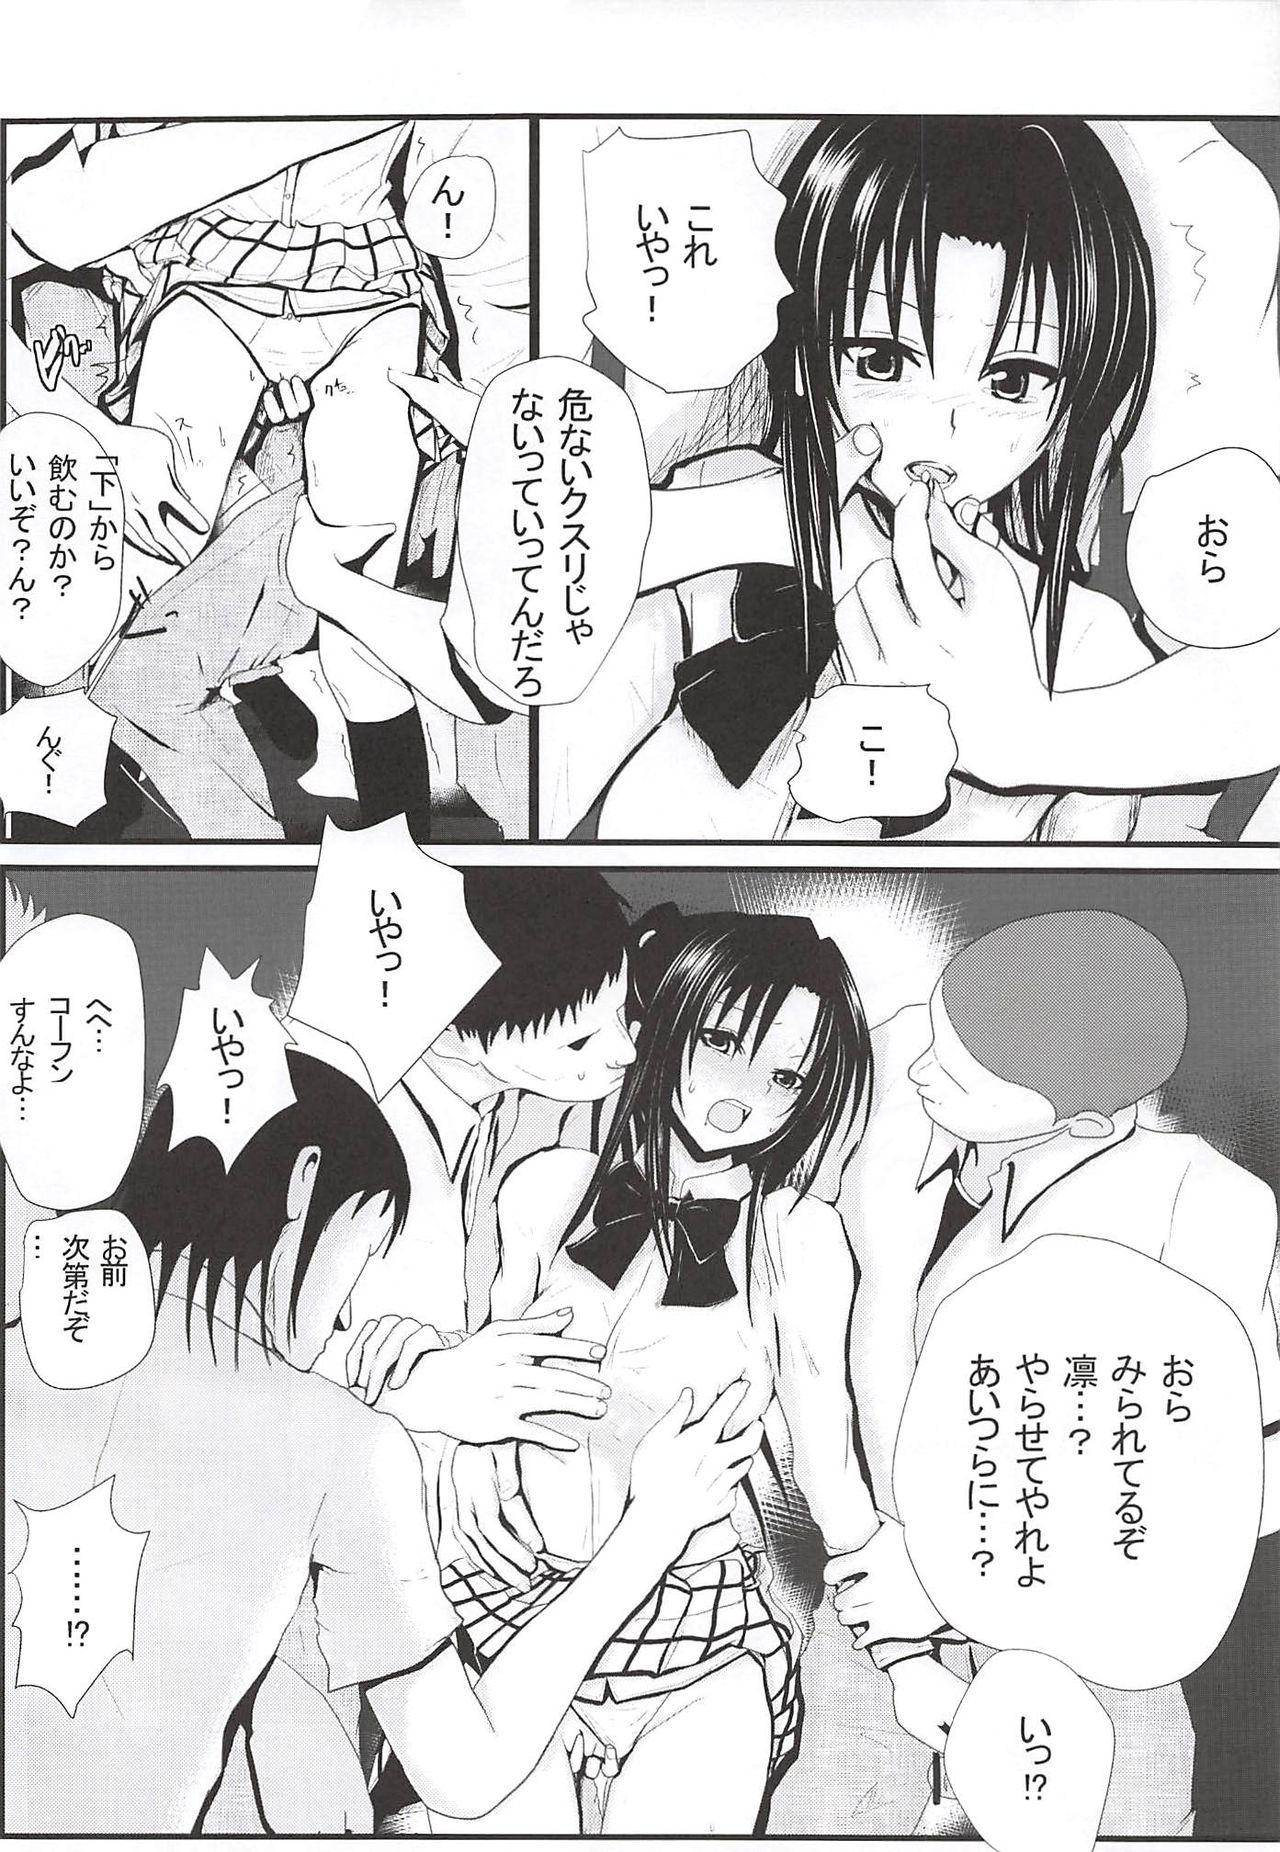 Free Blowjob Moeyo Rin Saturday In The Park - To love-ru Oral Sex Porn - Page 11